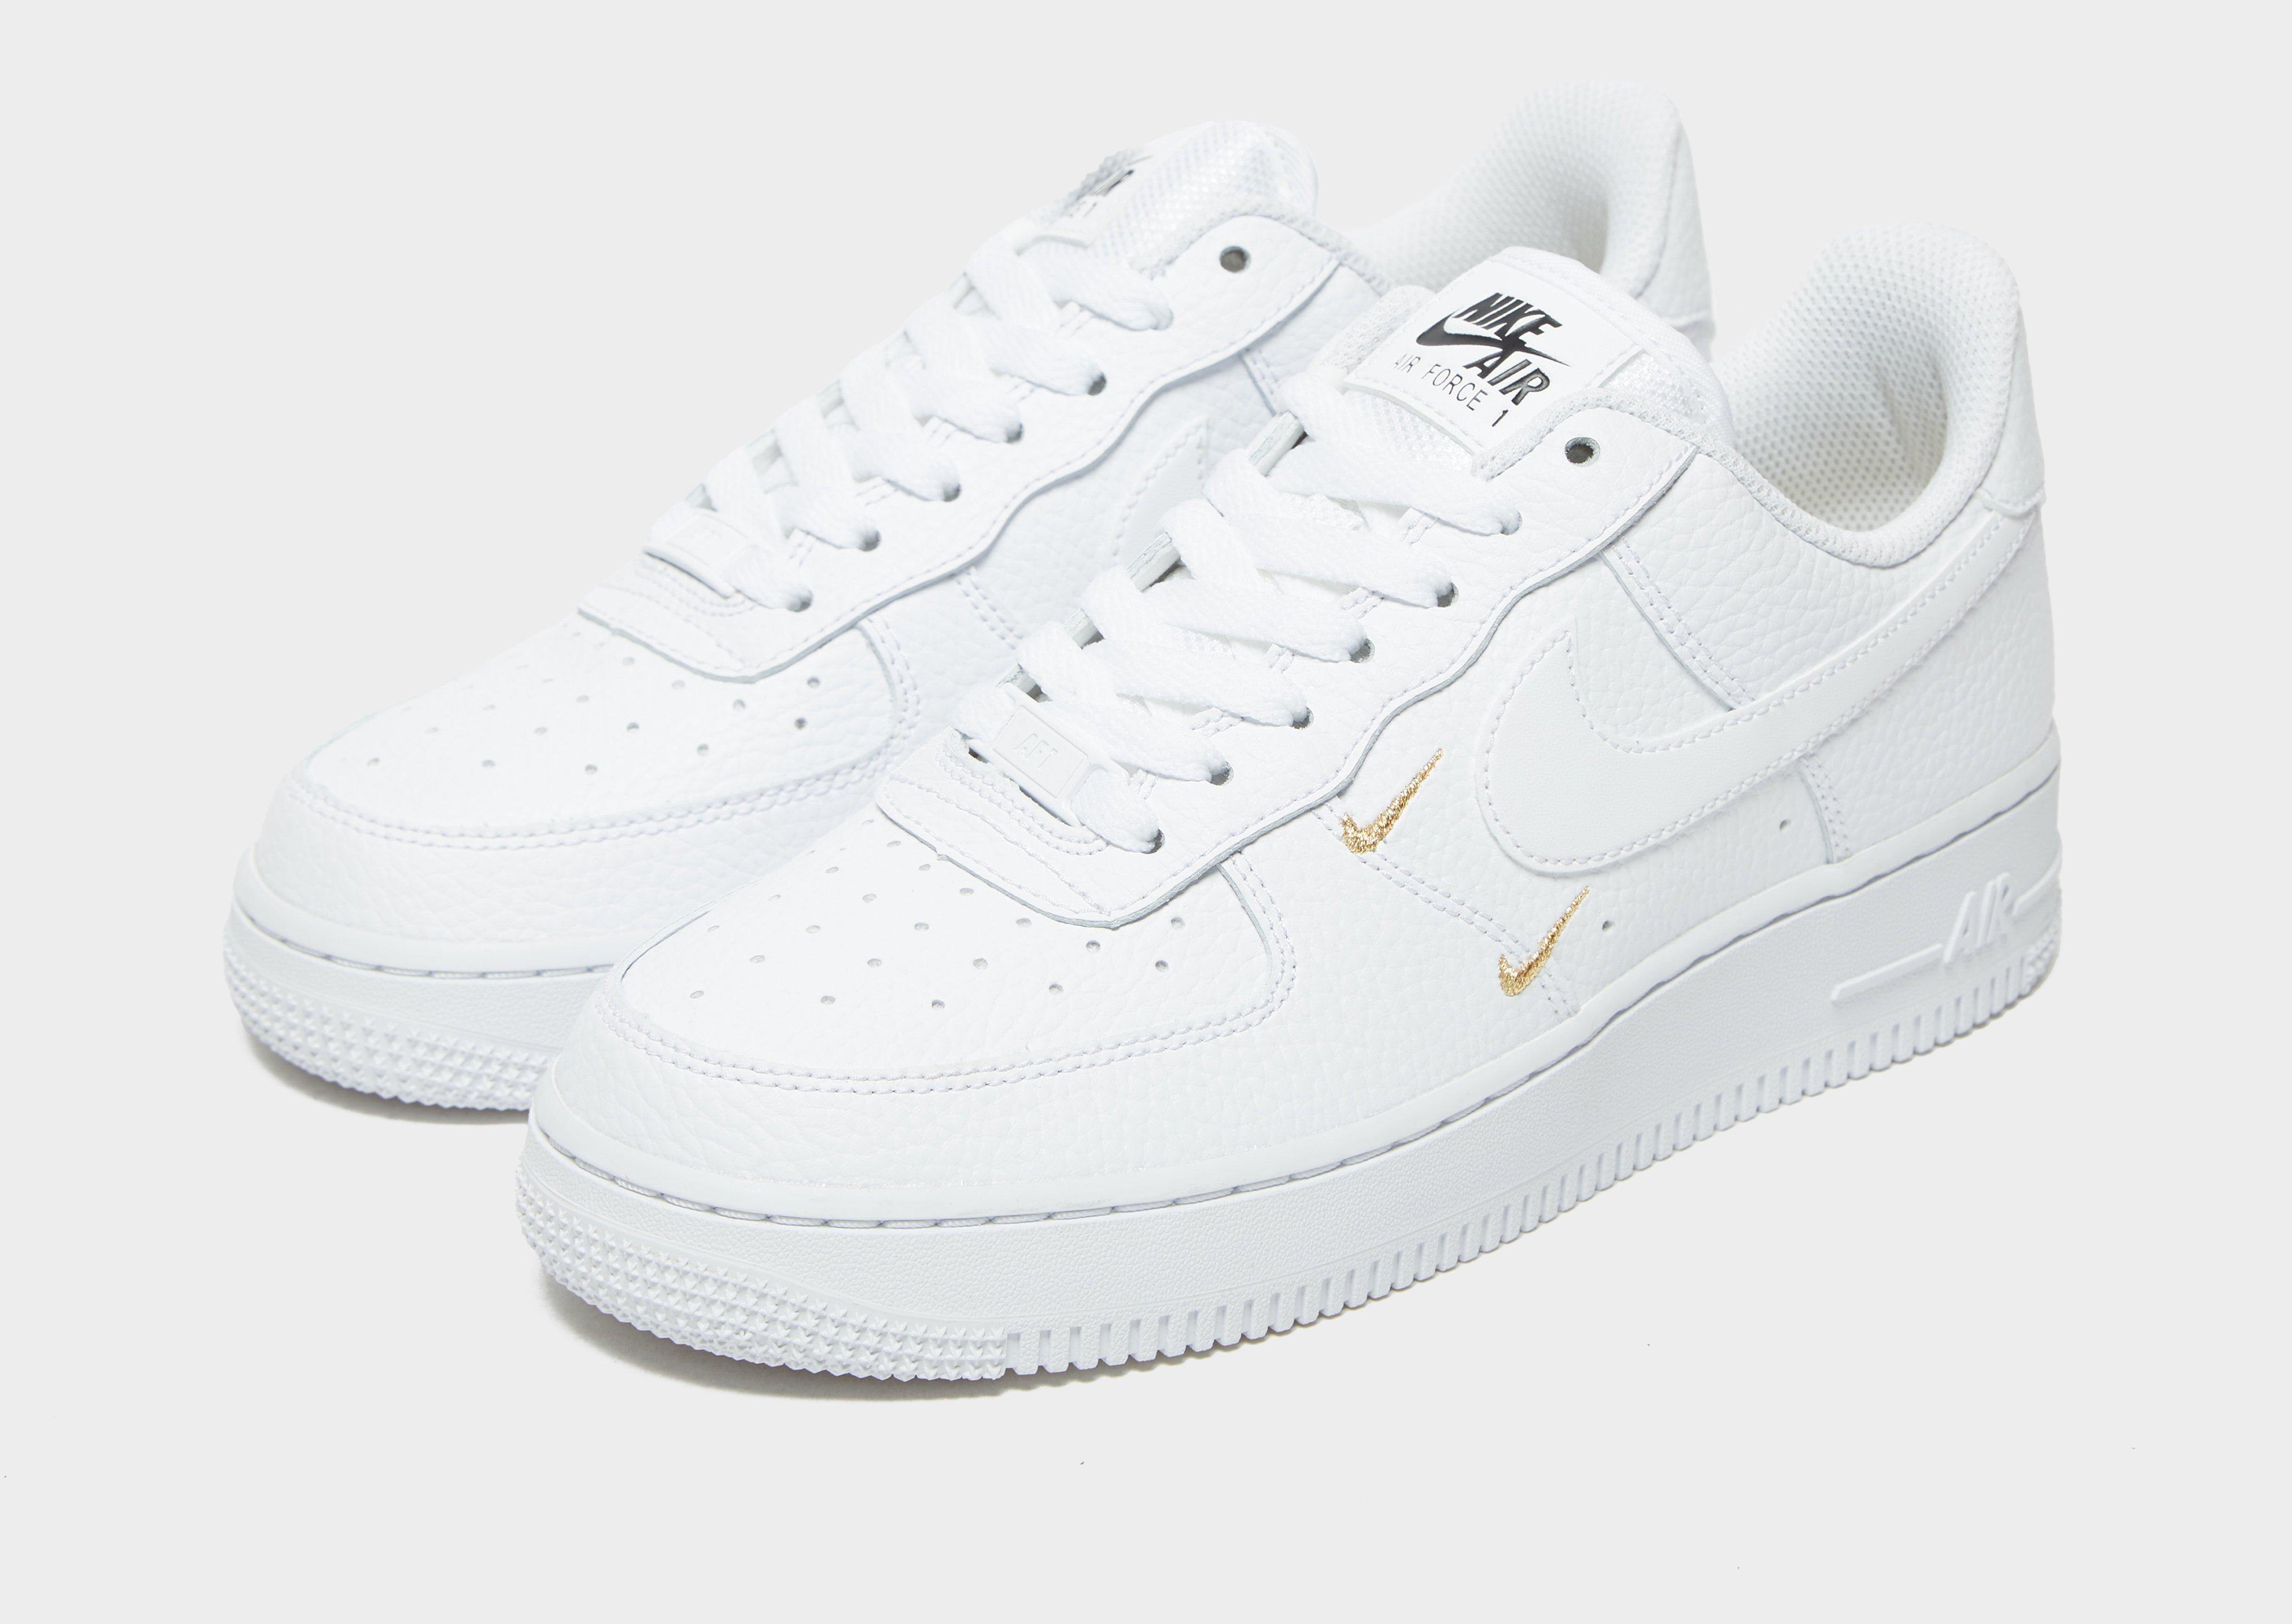 Acquista Nike Air Force 1 Swoosh Donna in Bianco